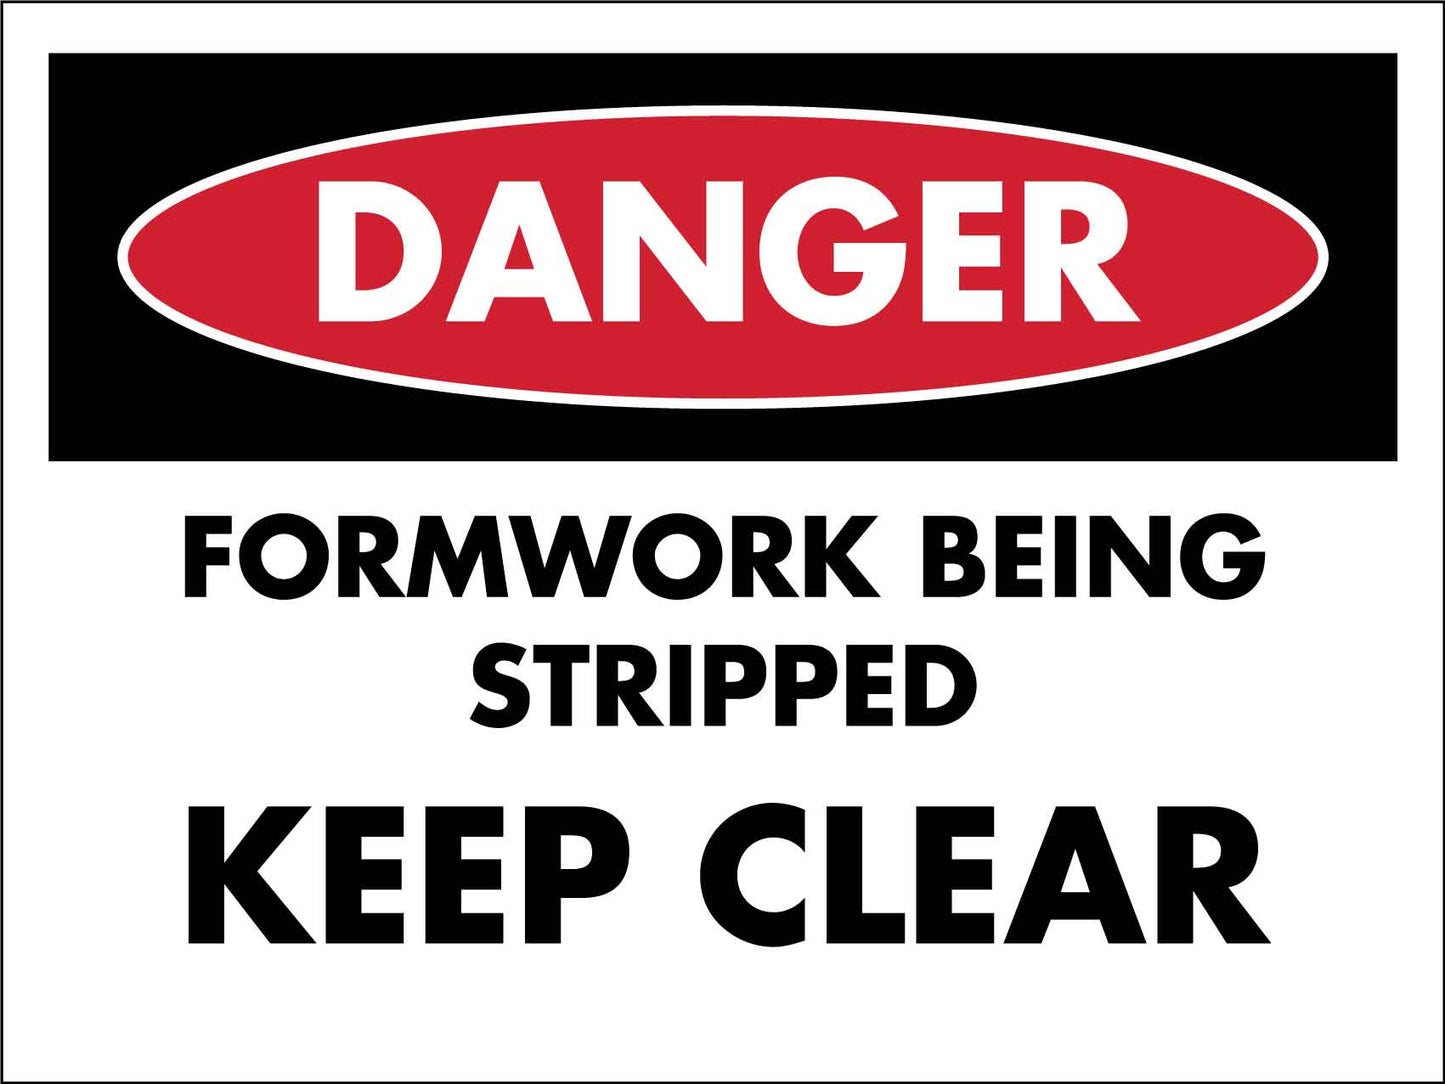 Danger Formwork Being Stripped Keep Clear Sign